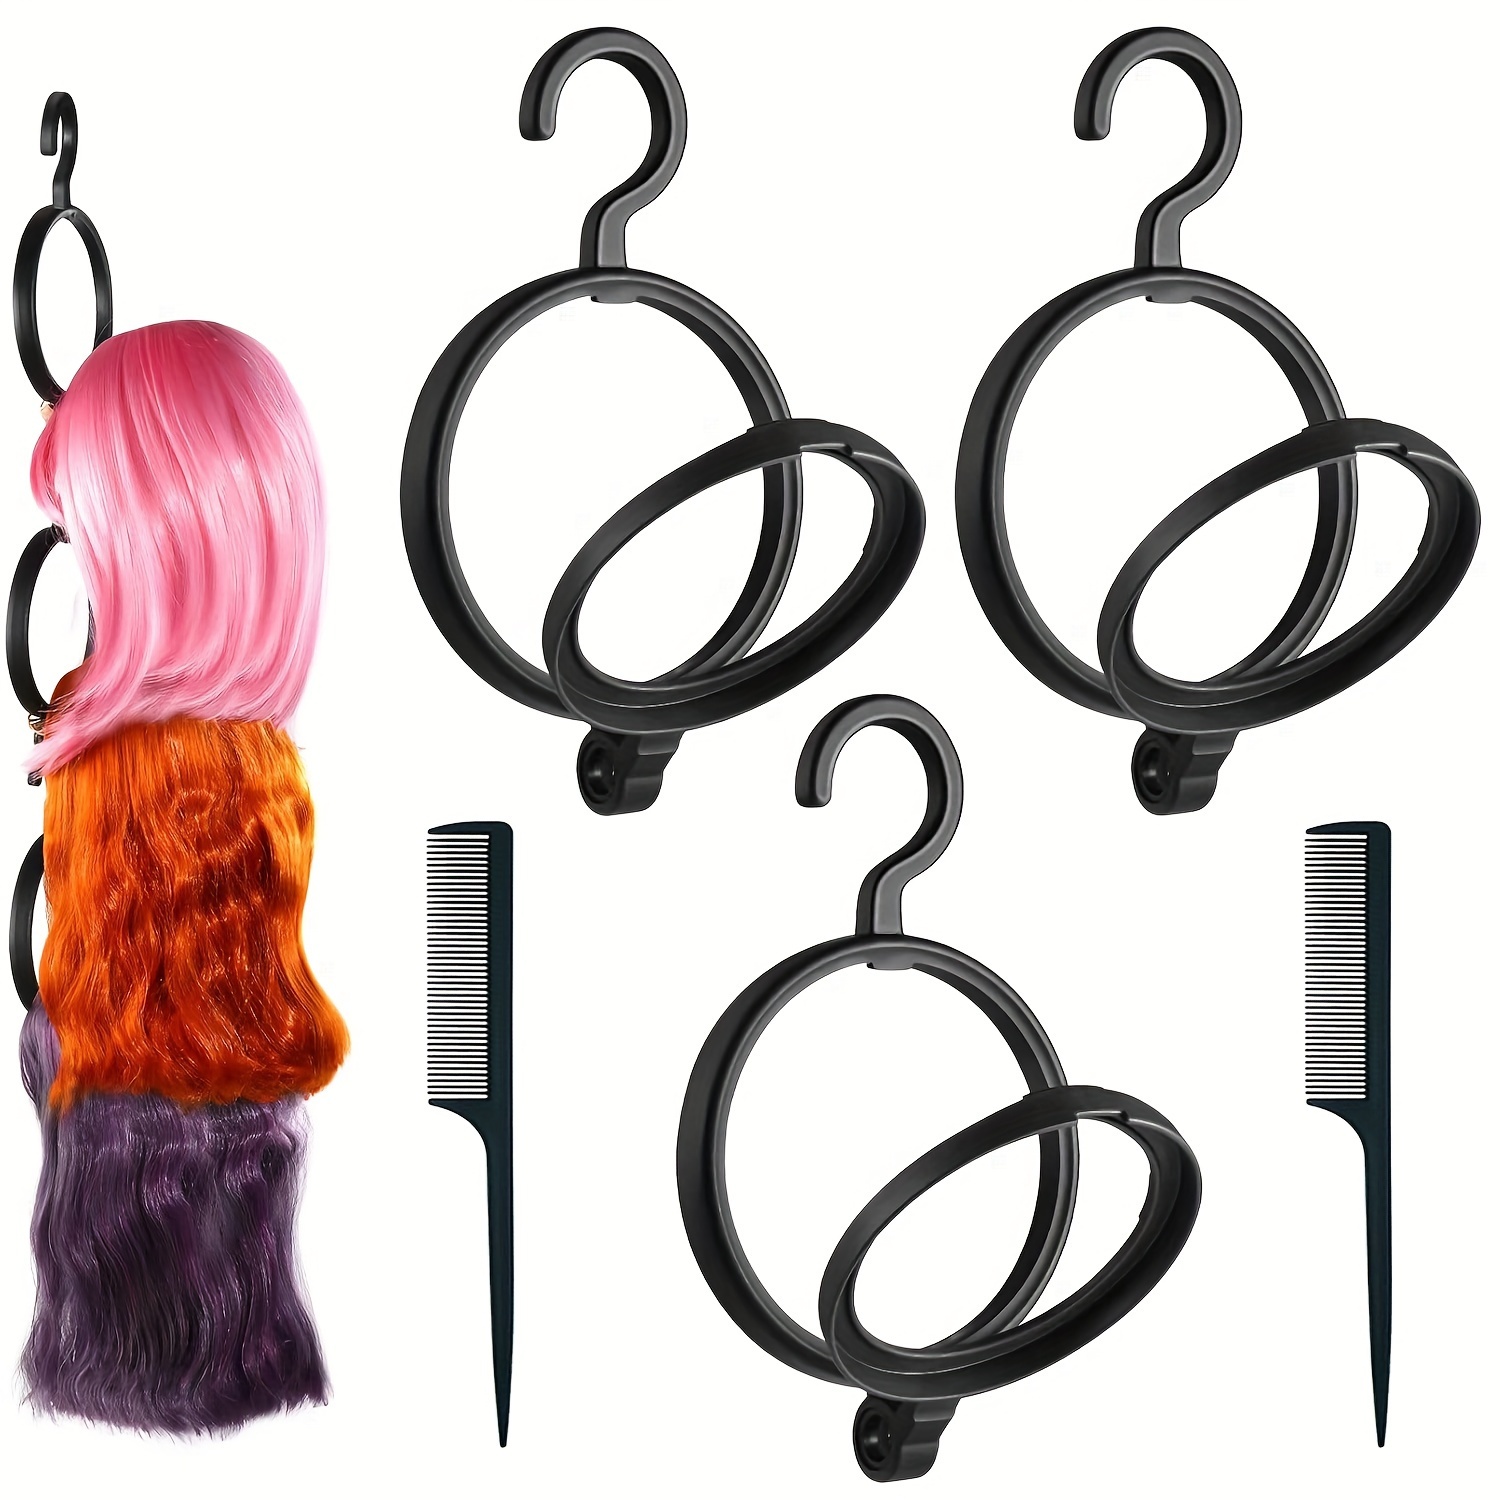 Hanging Wig Stand, 3pcs Premium Wig Hanger For Multiple Wigs For Display,  Storage, Styling, Portable Wig Stands Keep The Wig In Shape & Perfect